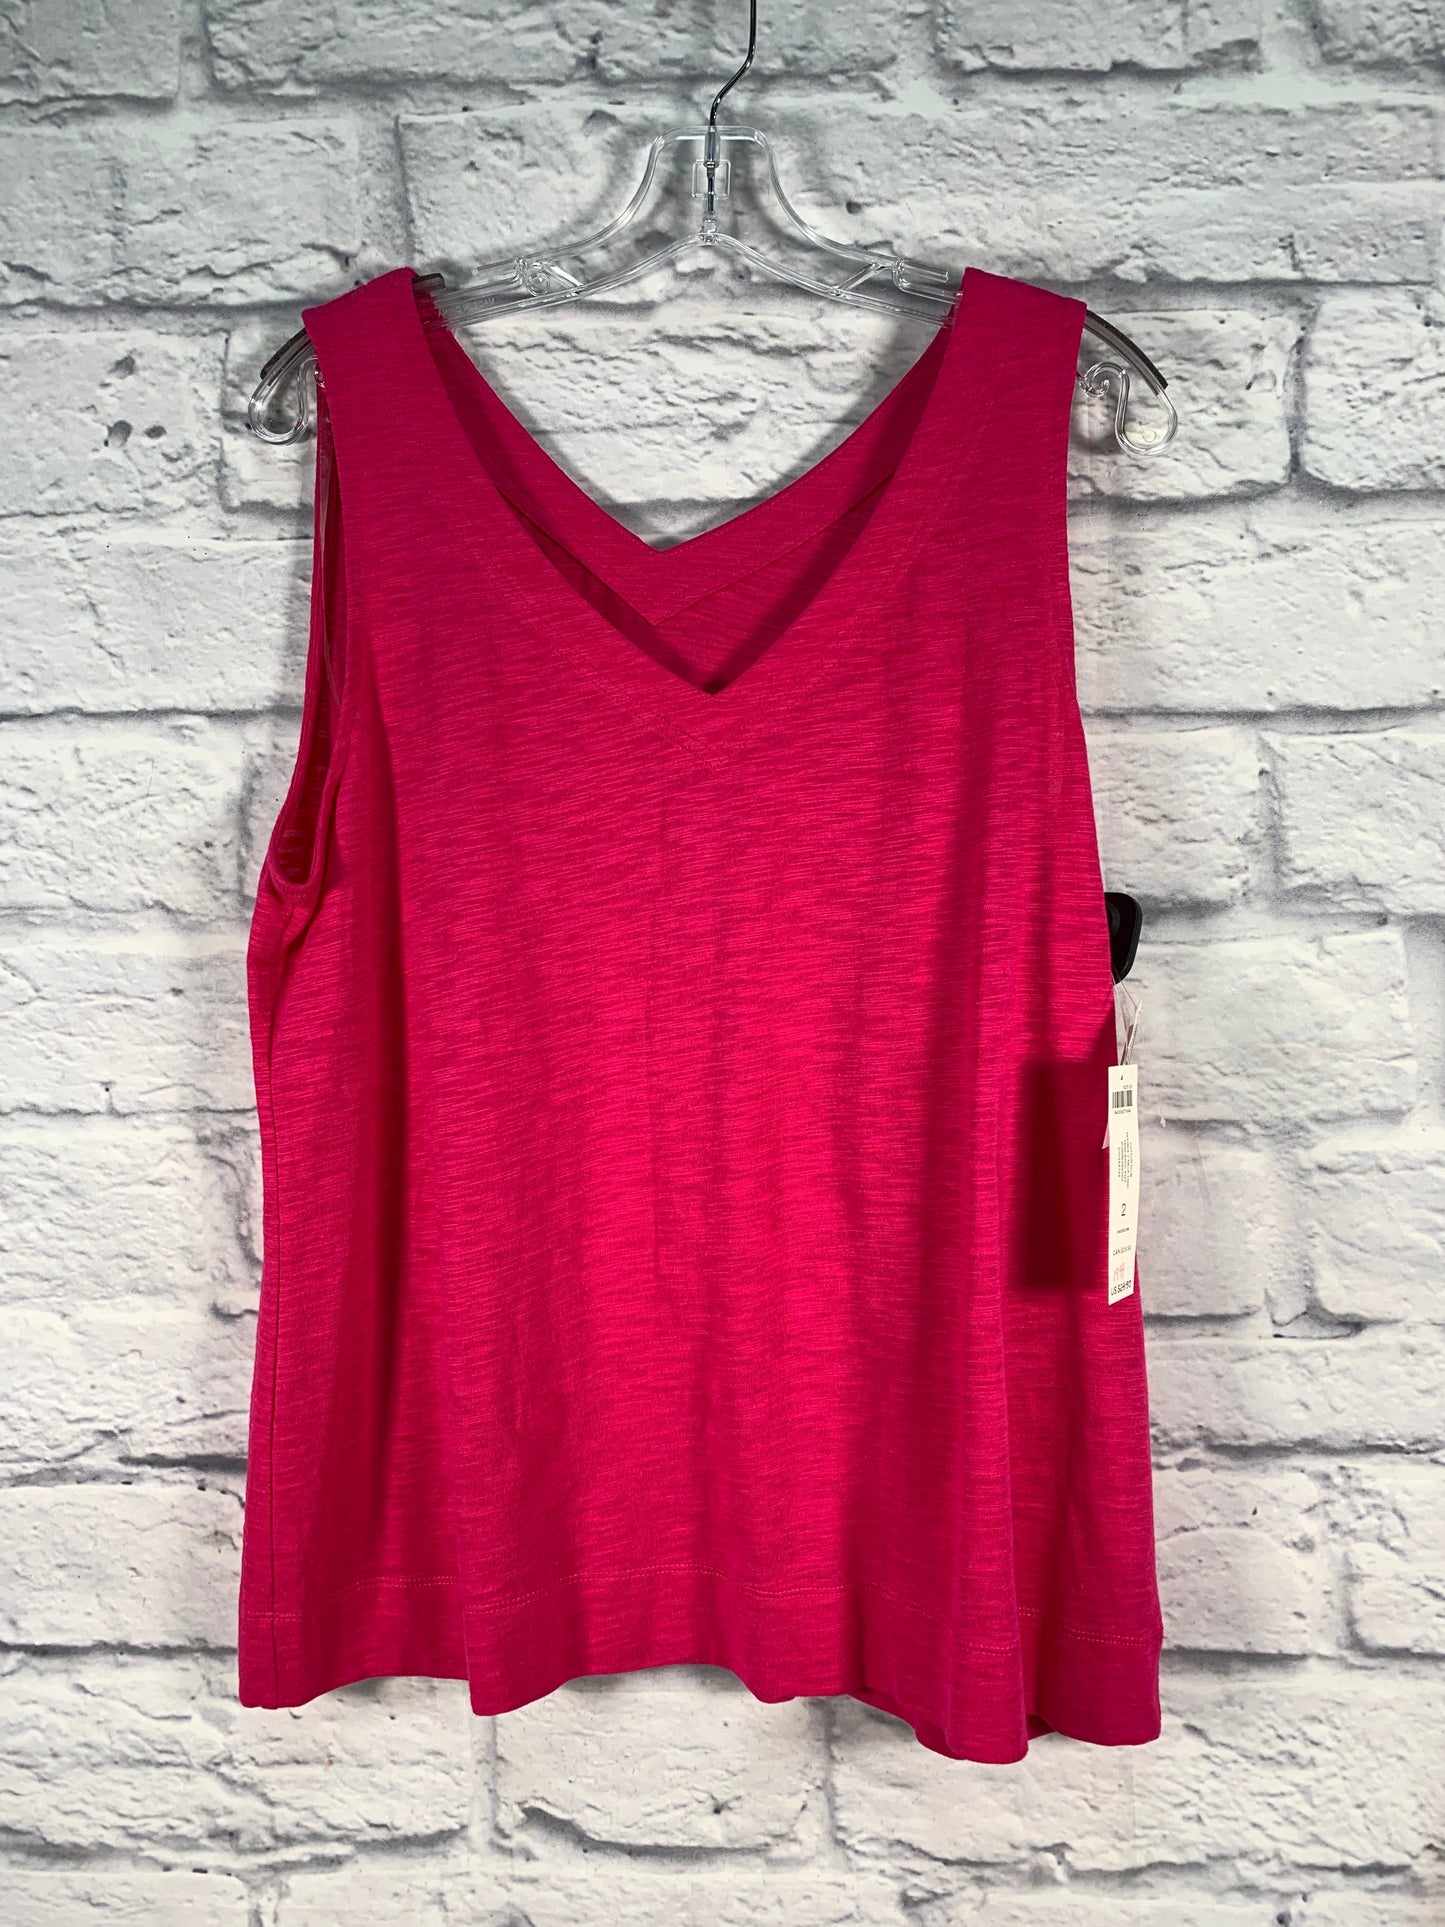 Pink Top Sleeveless Chicos, Size L